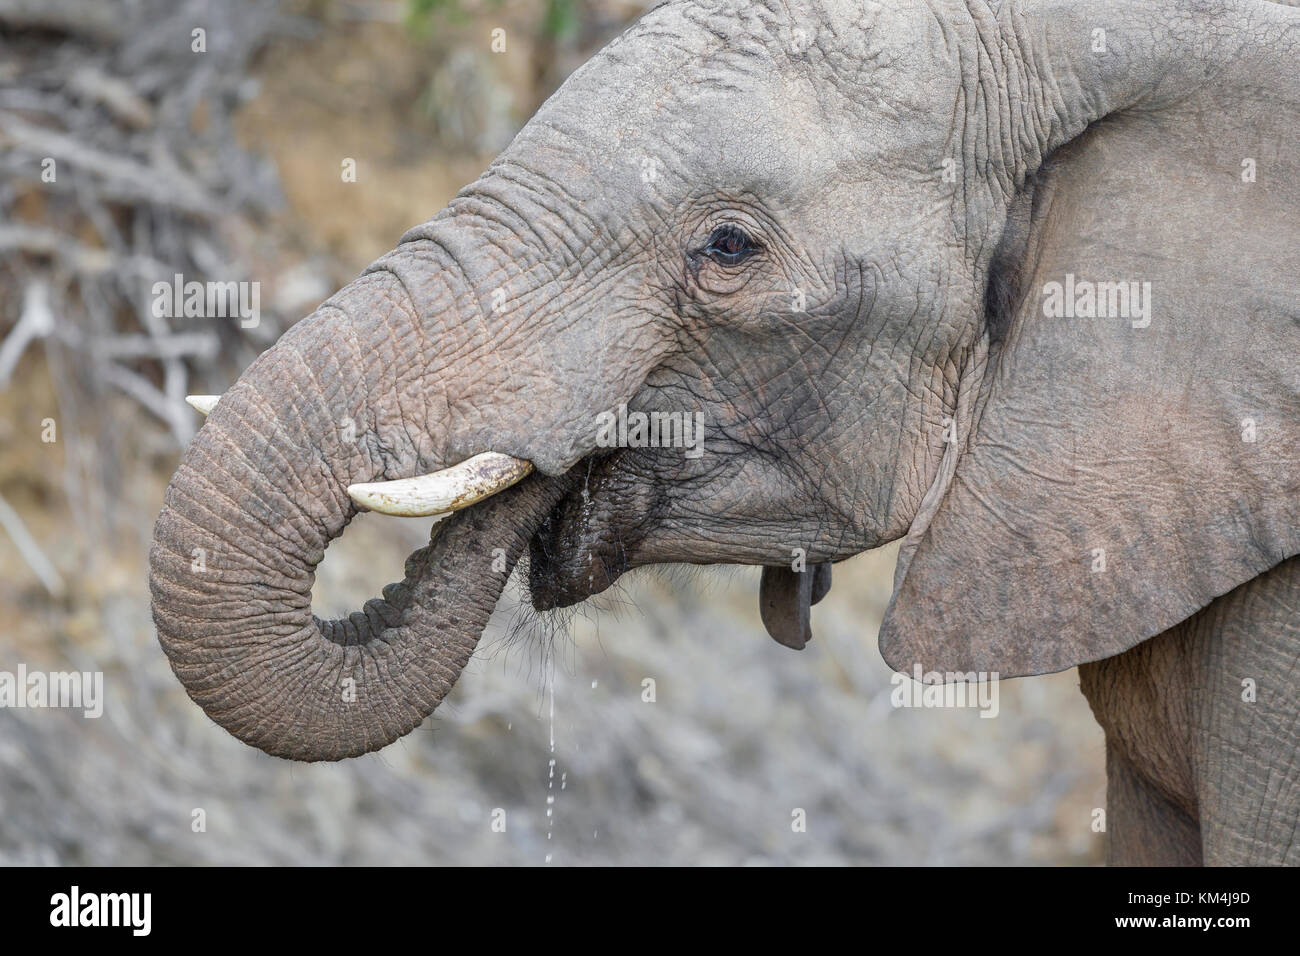 African Elephant drinking, close up portrait, with water running down from his mouth. Stock Photo